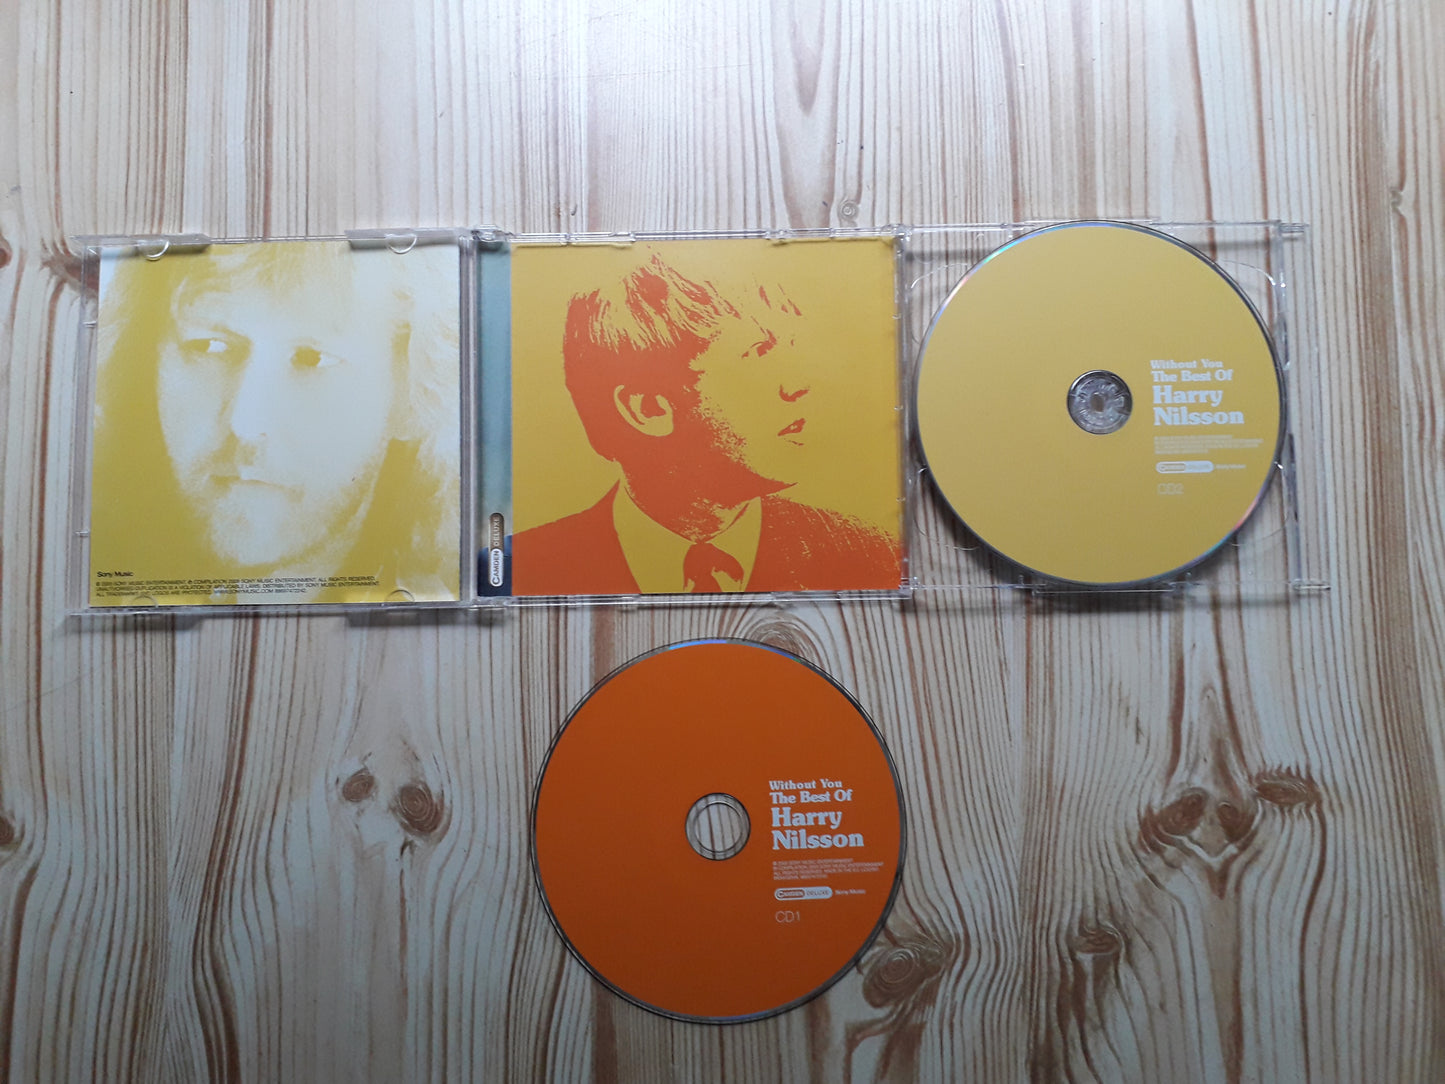 Nilsson-The Very Best Of Harry Nilsson Dbl CD (886974722427)